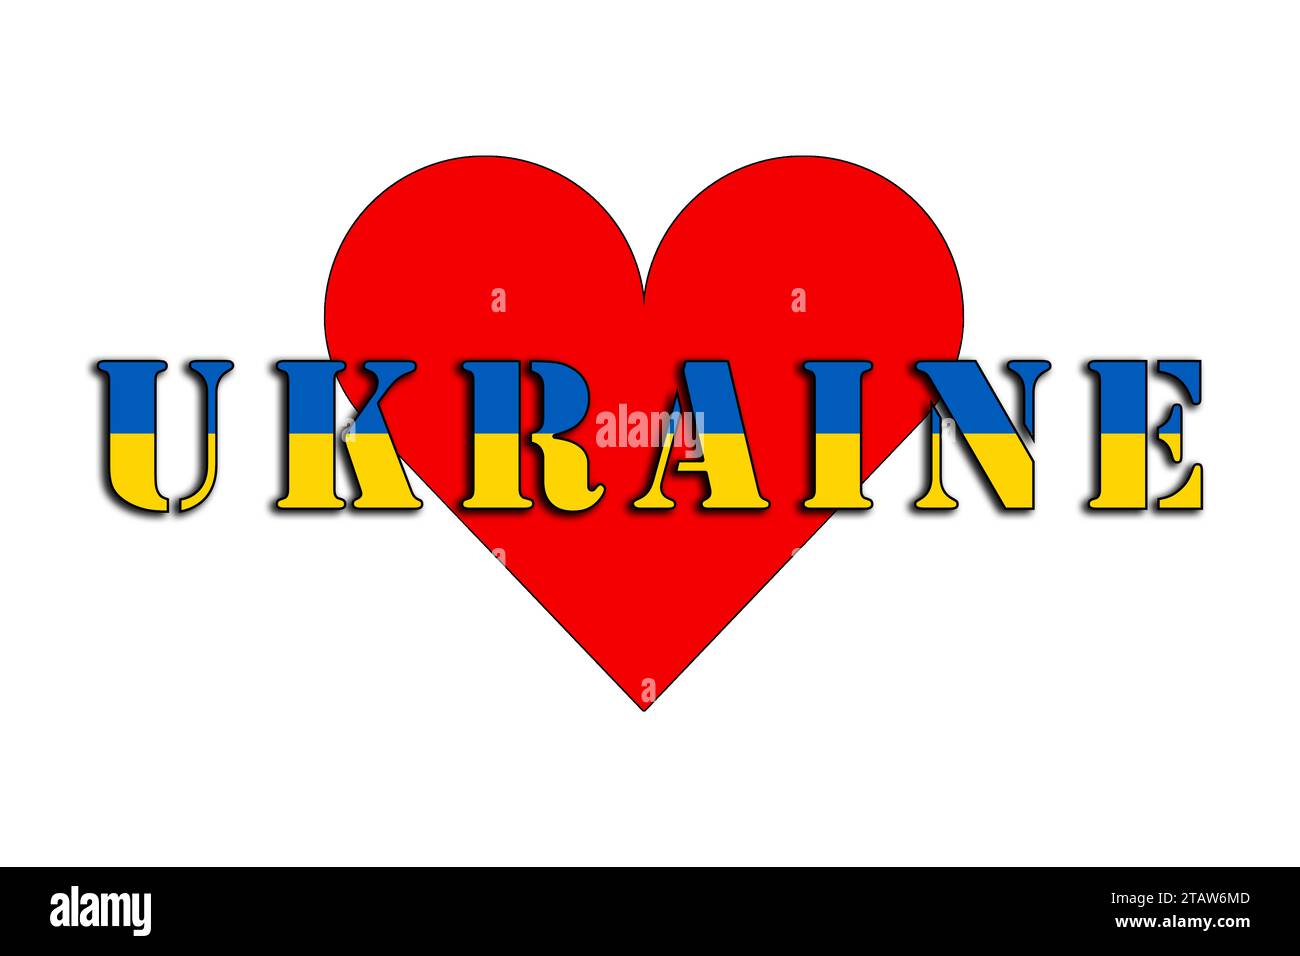 Ukraine, the name of the country and the colors of the flag, illustrated graphics of the logo and heart for the Ukrainian people Stock Photo